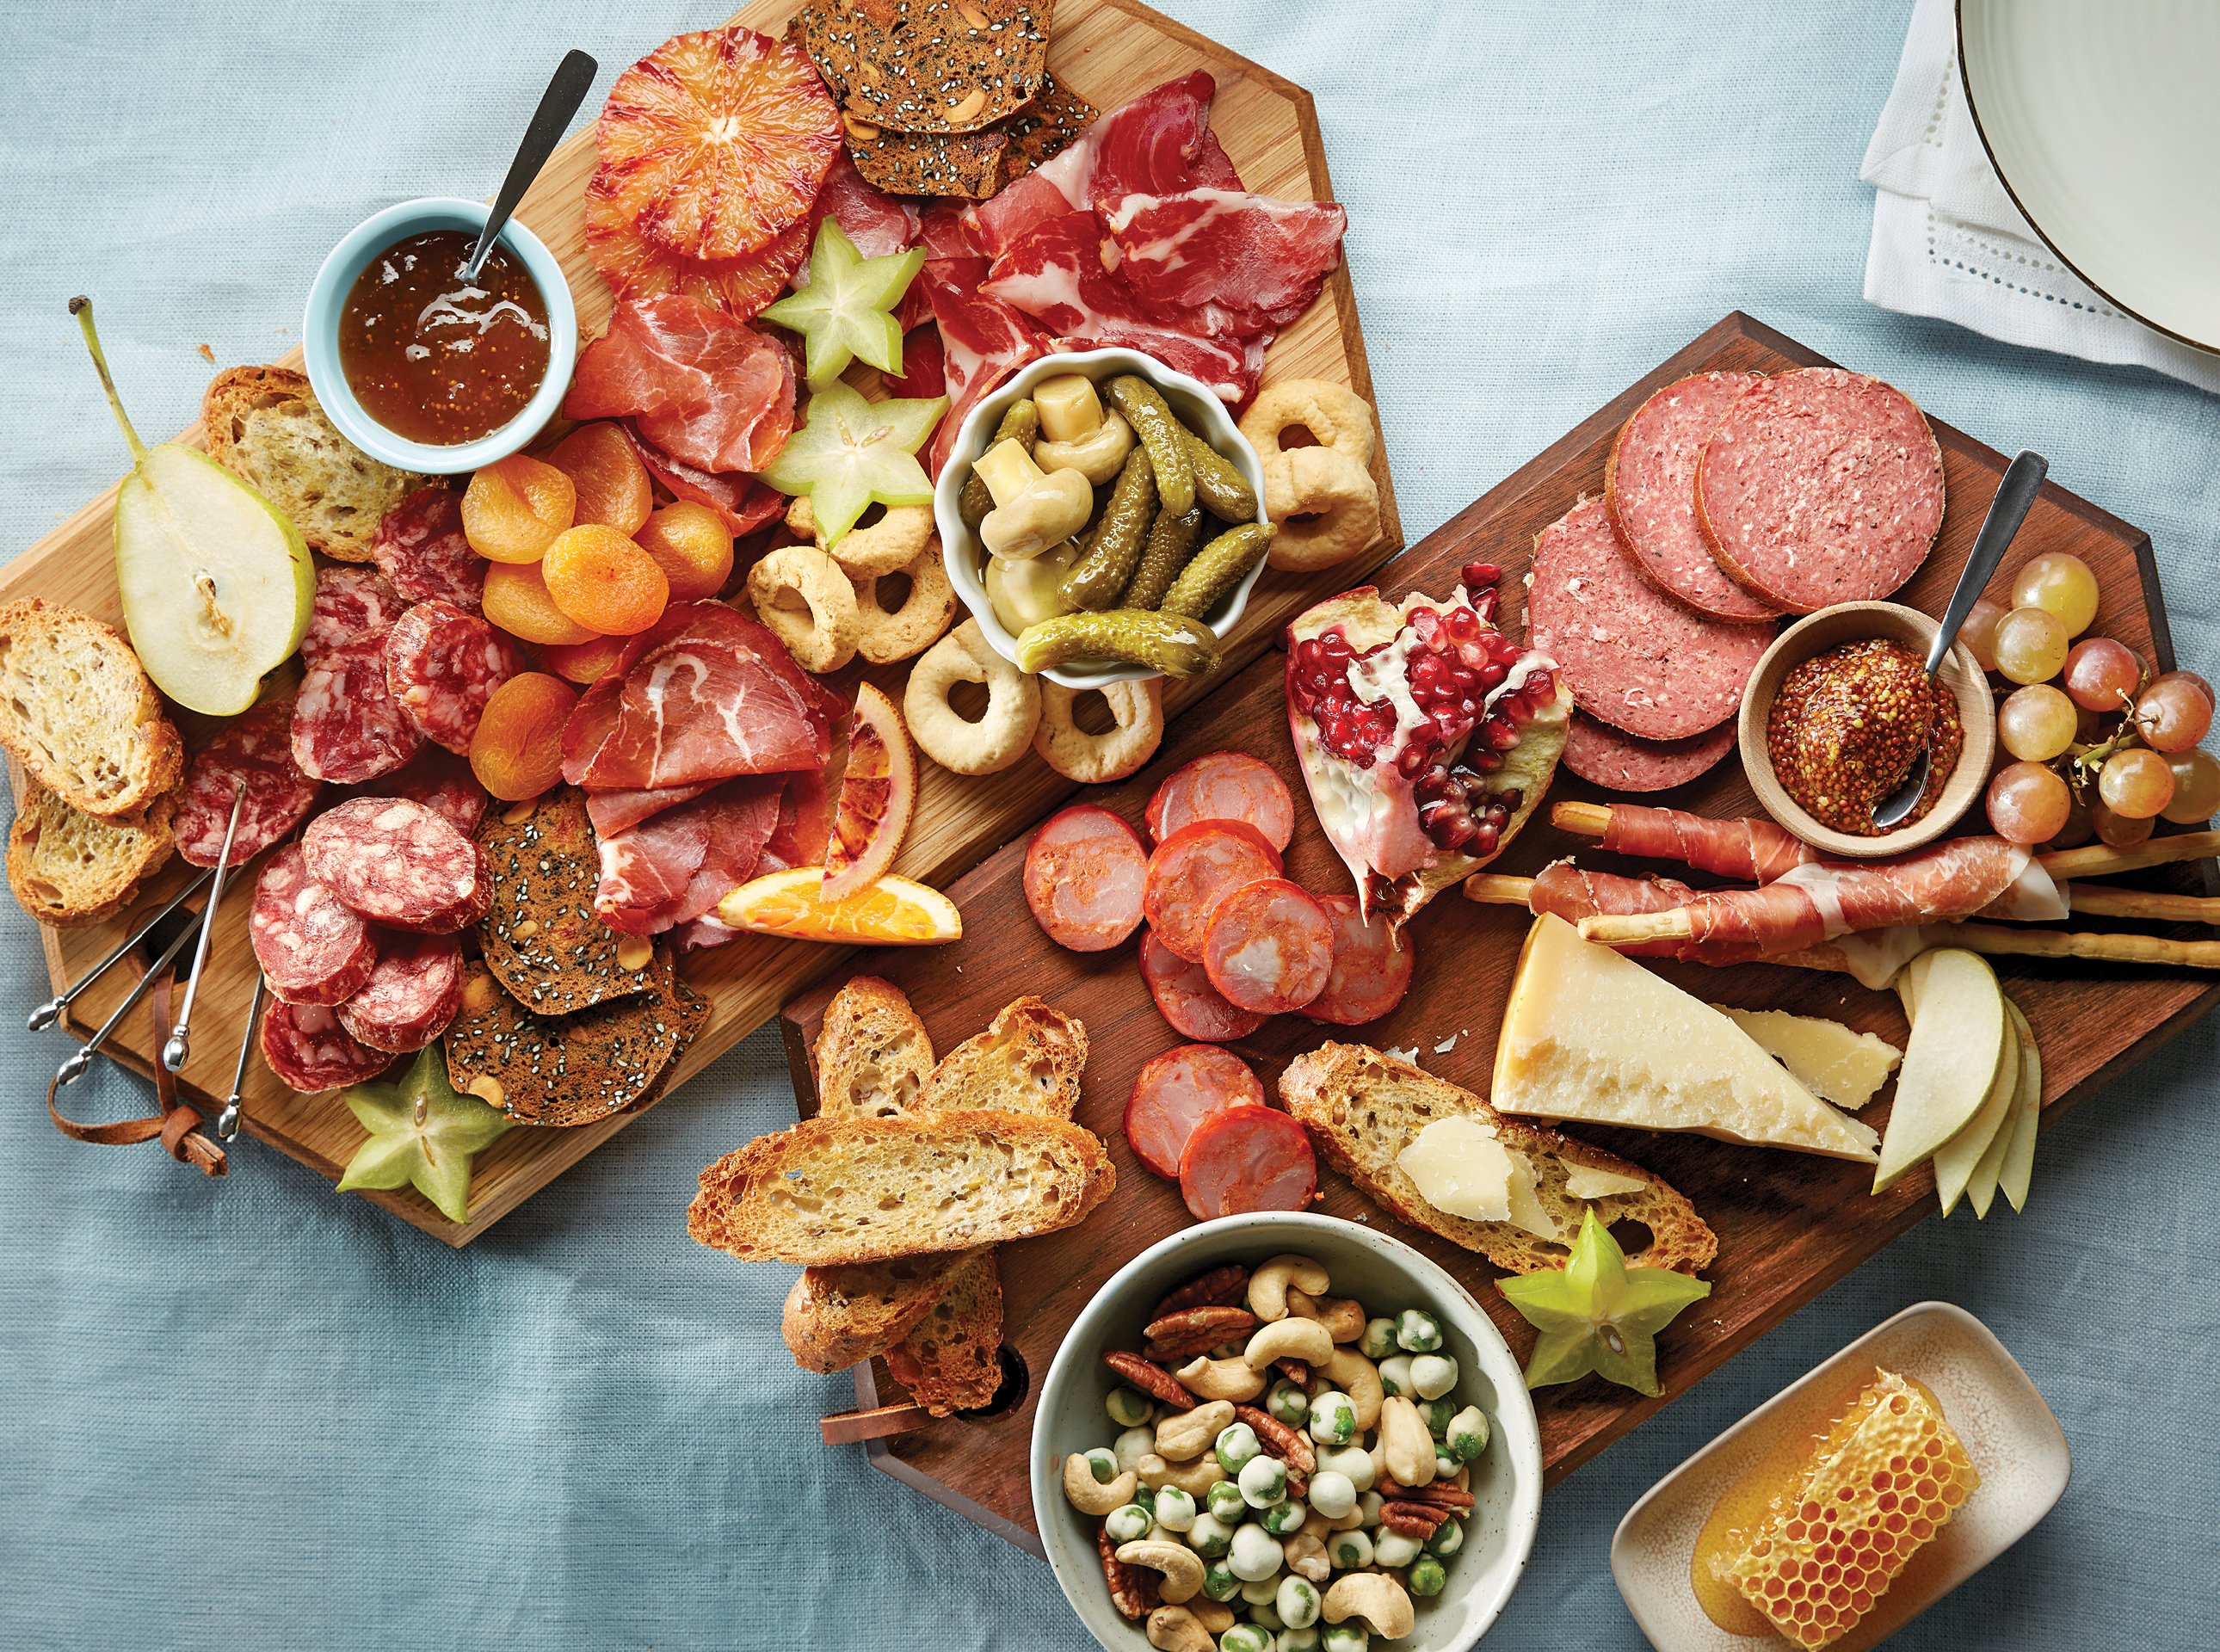 Build your own charcuterie board